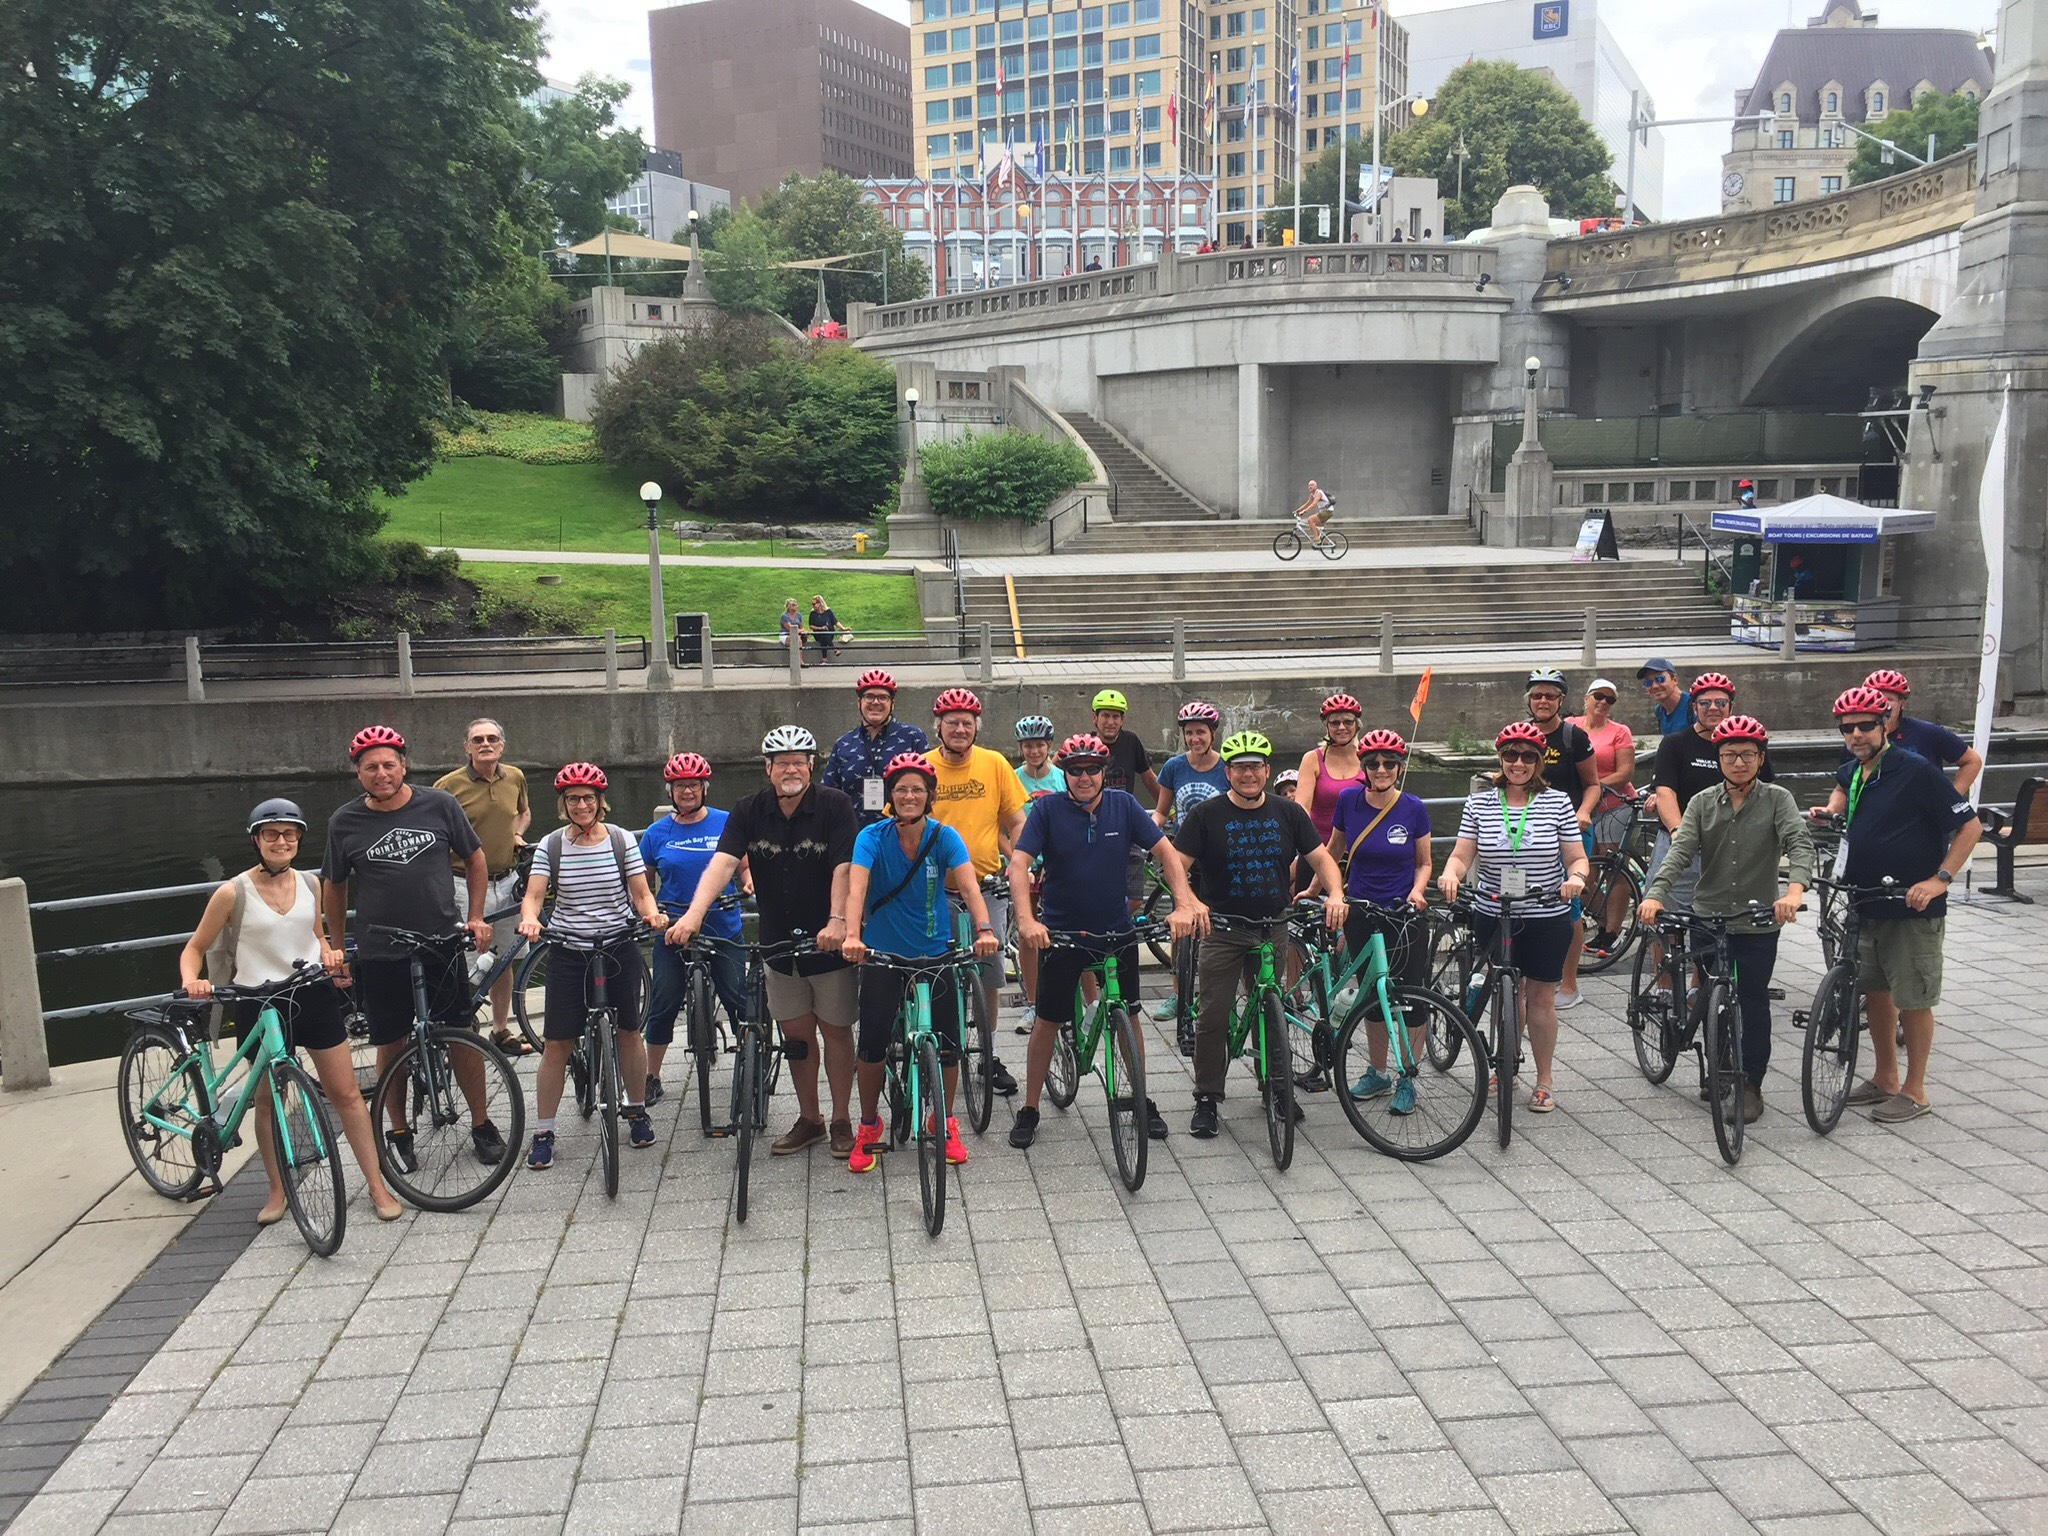 A group of urban cyclists, posing for the camera.